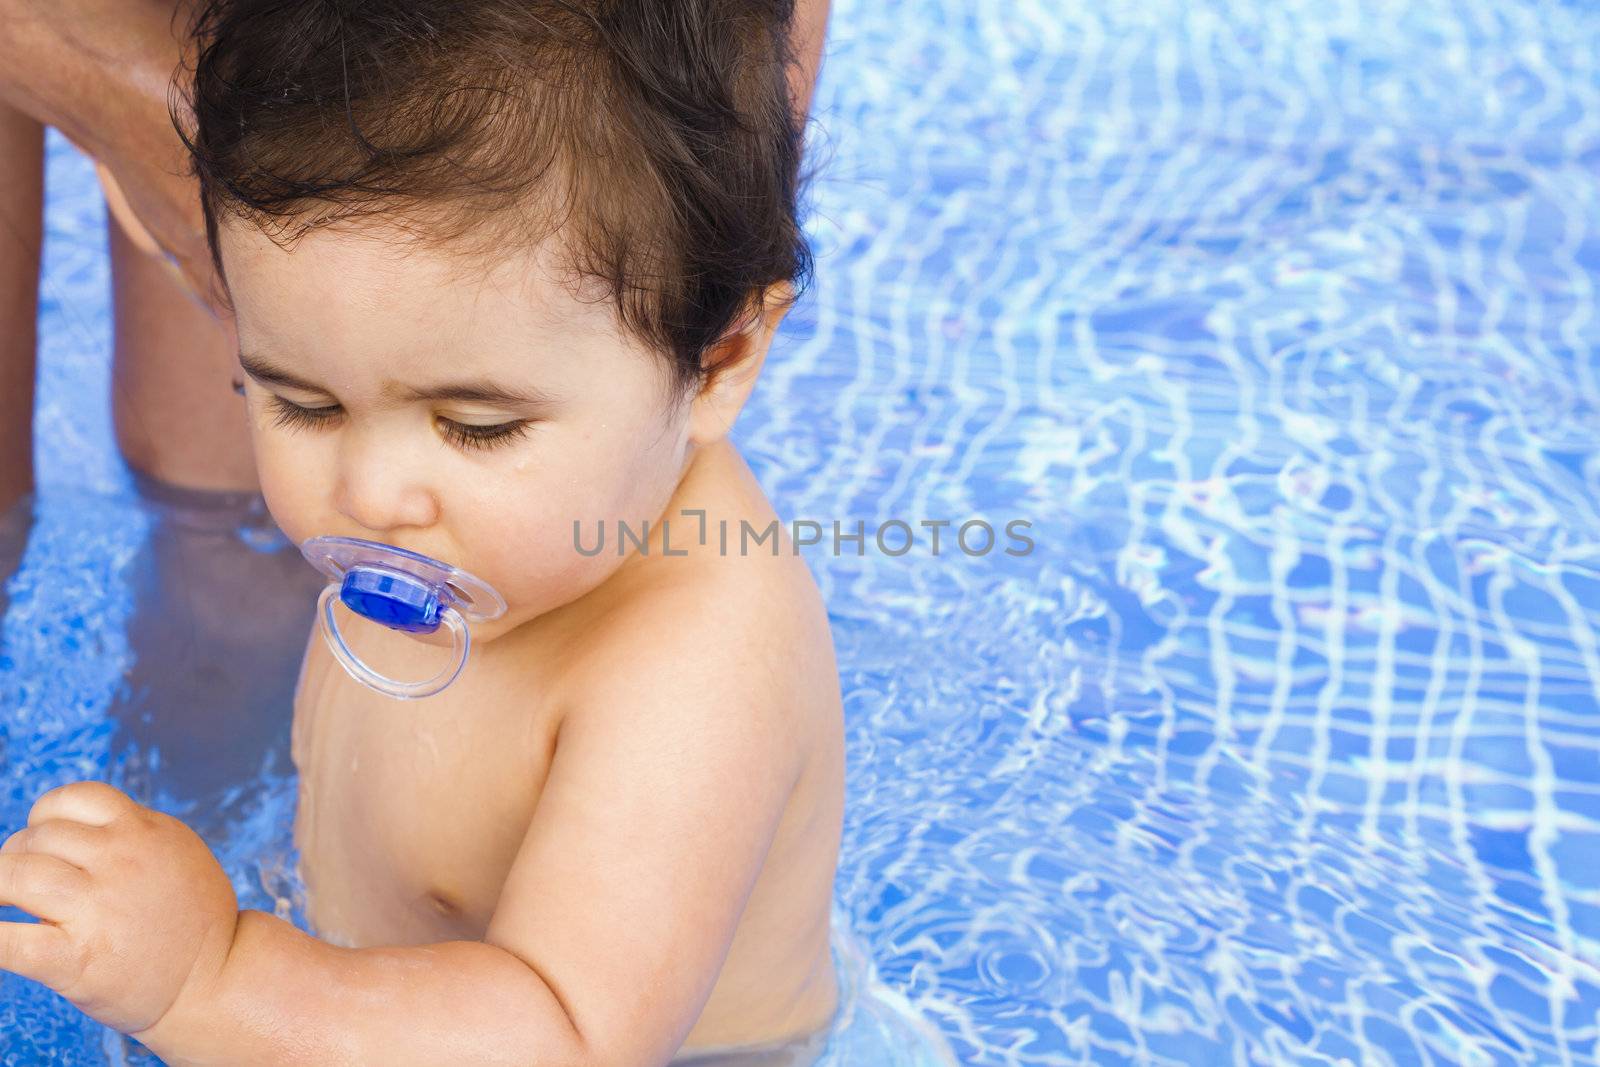 Newborn baby scared of the pool water